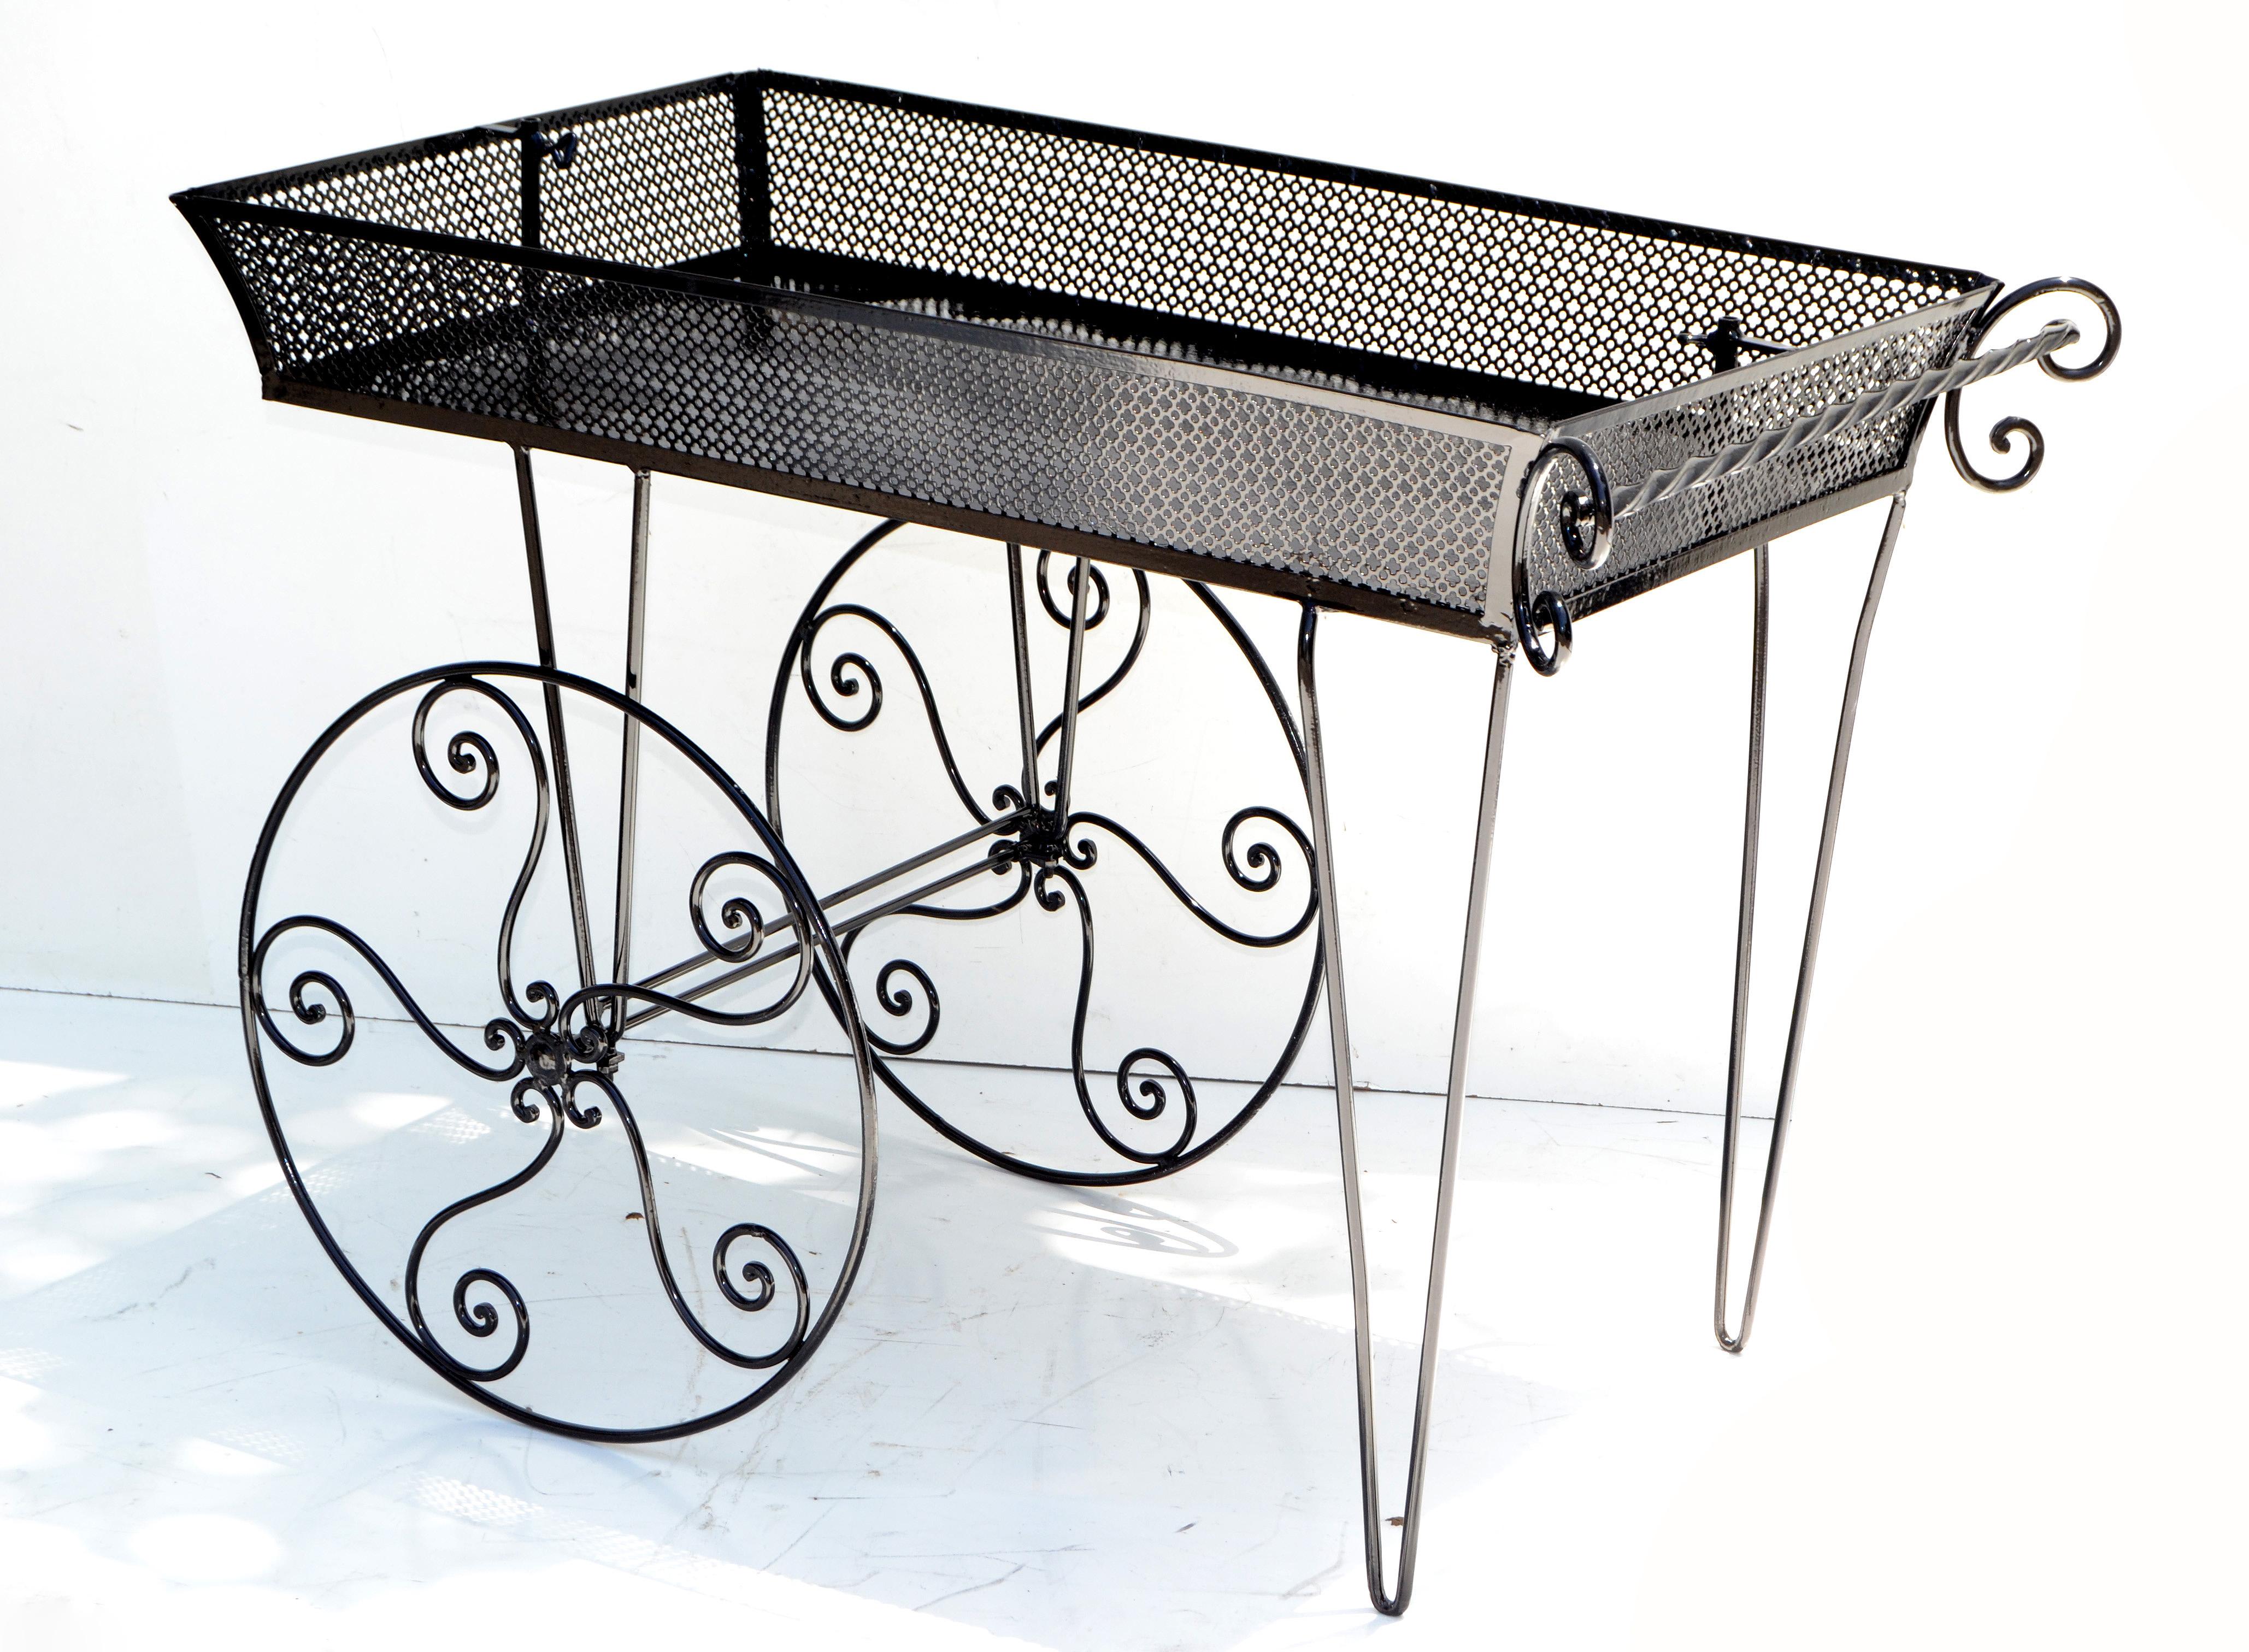 Superb Mid-Century Modern paris marketplace flower cart in the style of Mathieu Matégot.
Handcrafted wrought iron wheels, hairpin legs, handles and a metal mesh display table in gloss black finish.
Iconic paris marketplace collector's item.
  